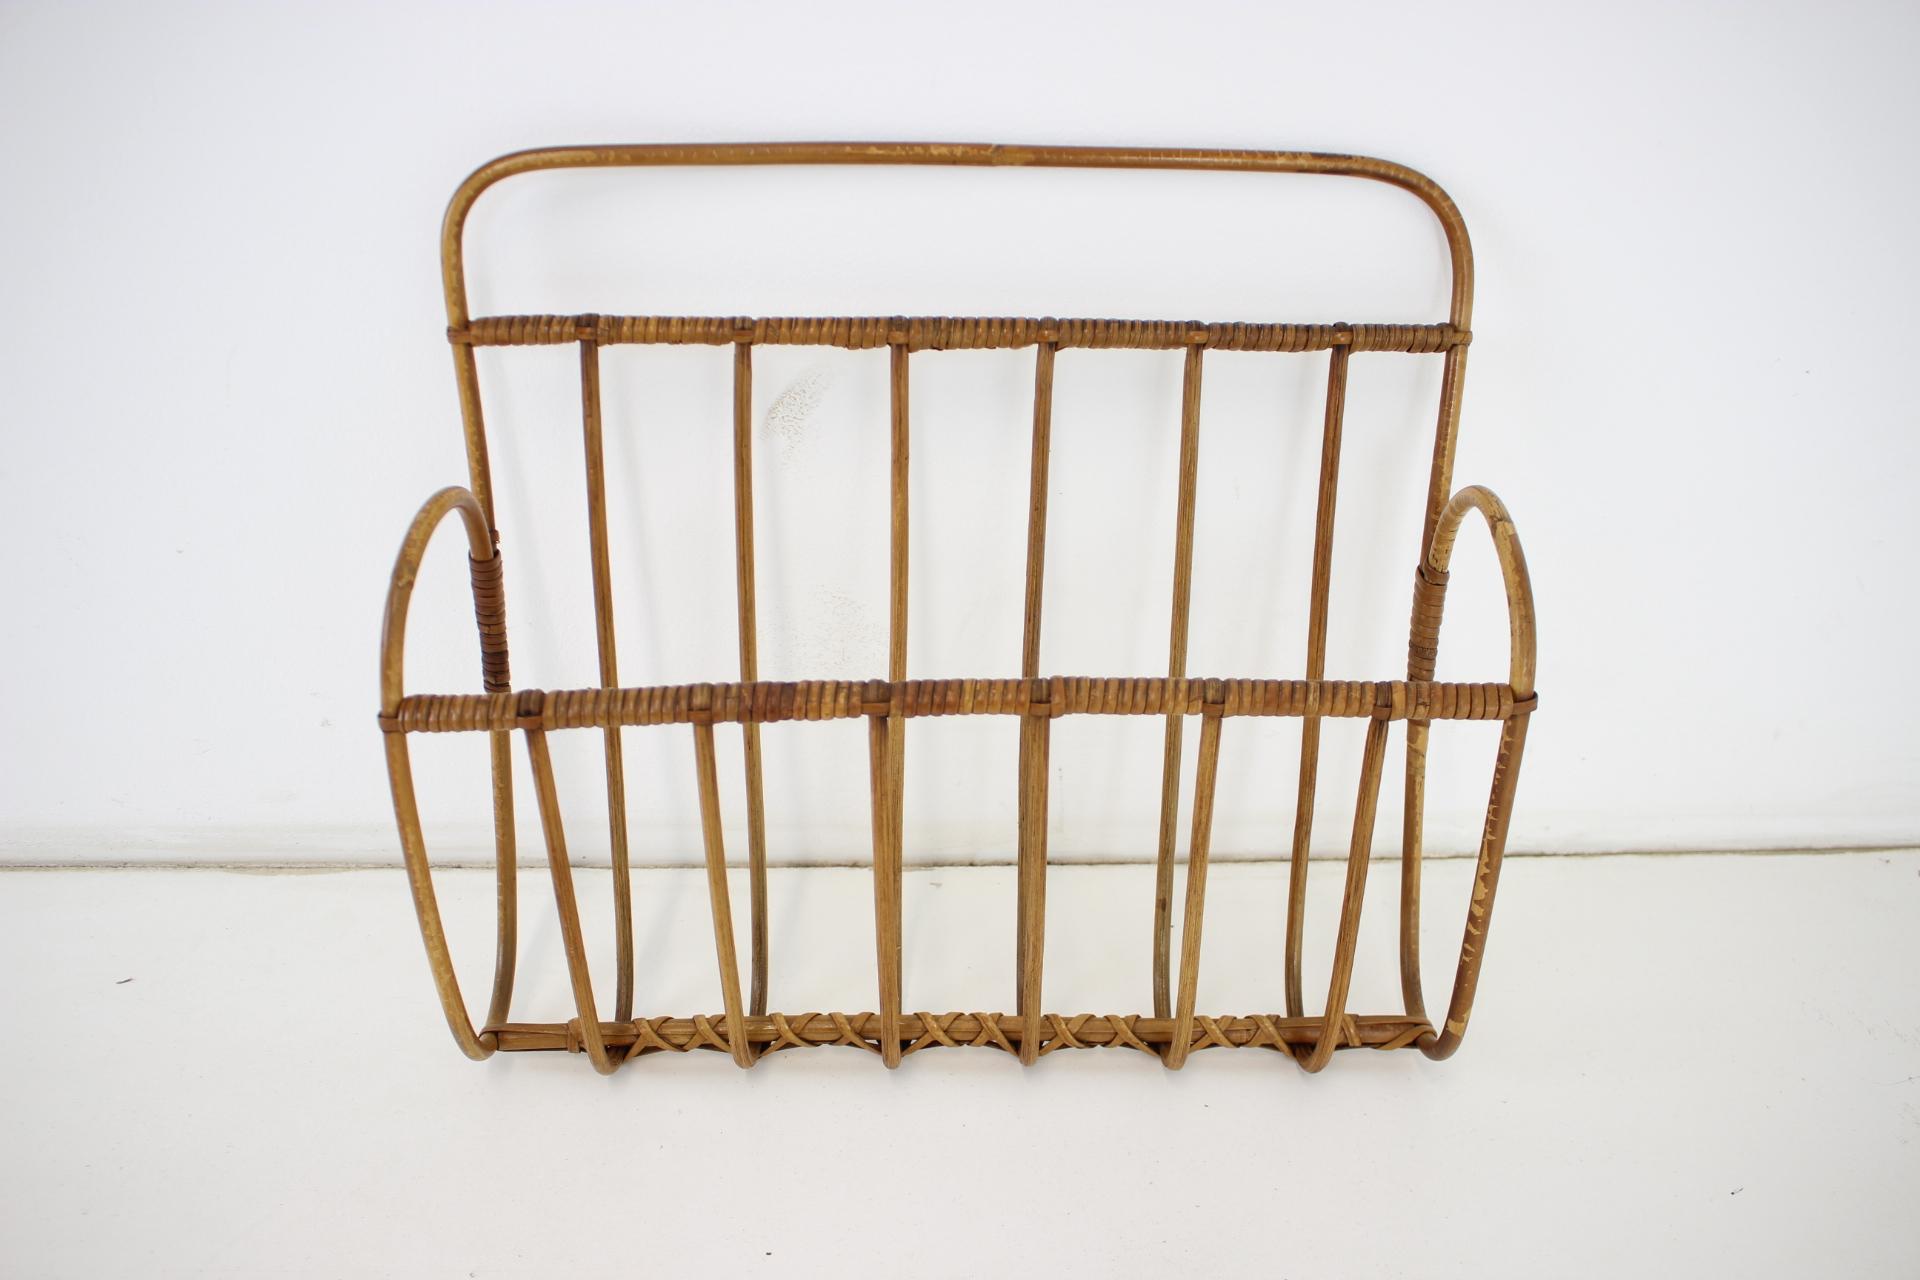 Vintage magazine or newspaper wall holder made of bamboo. Good vintage condition.